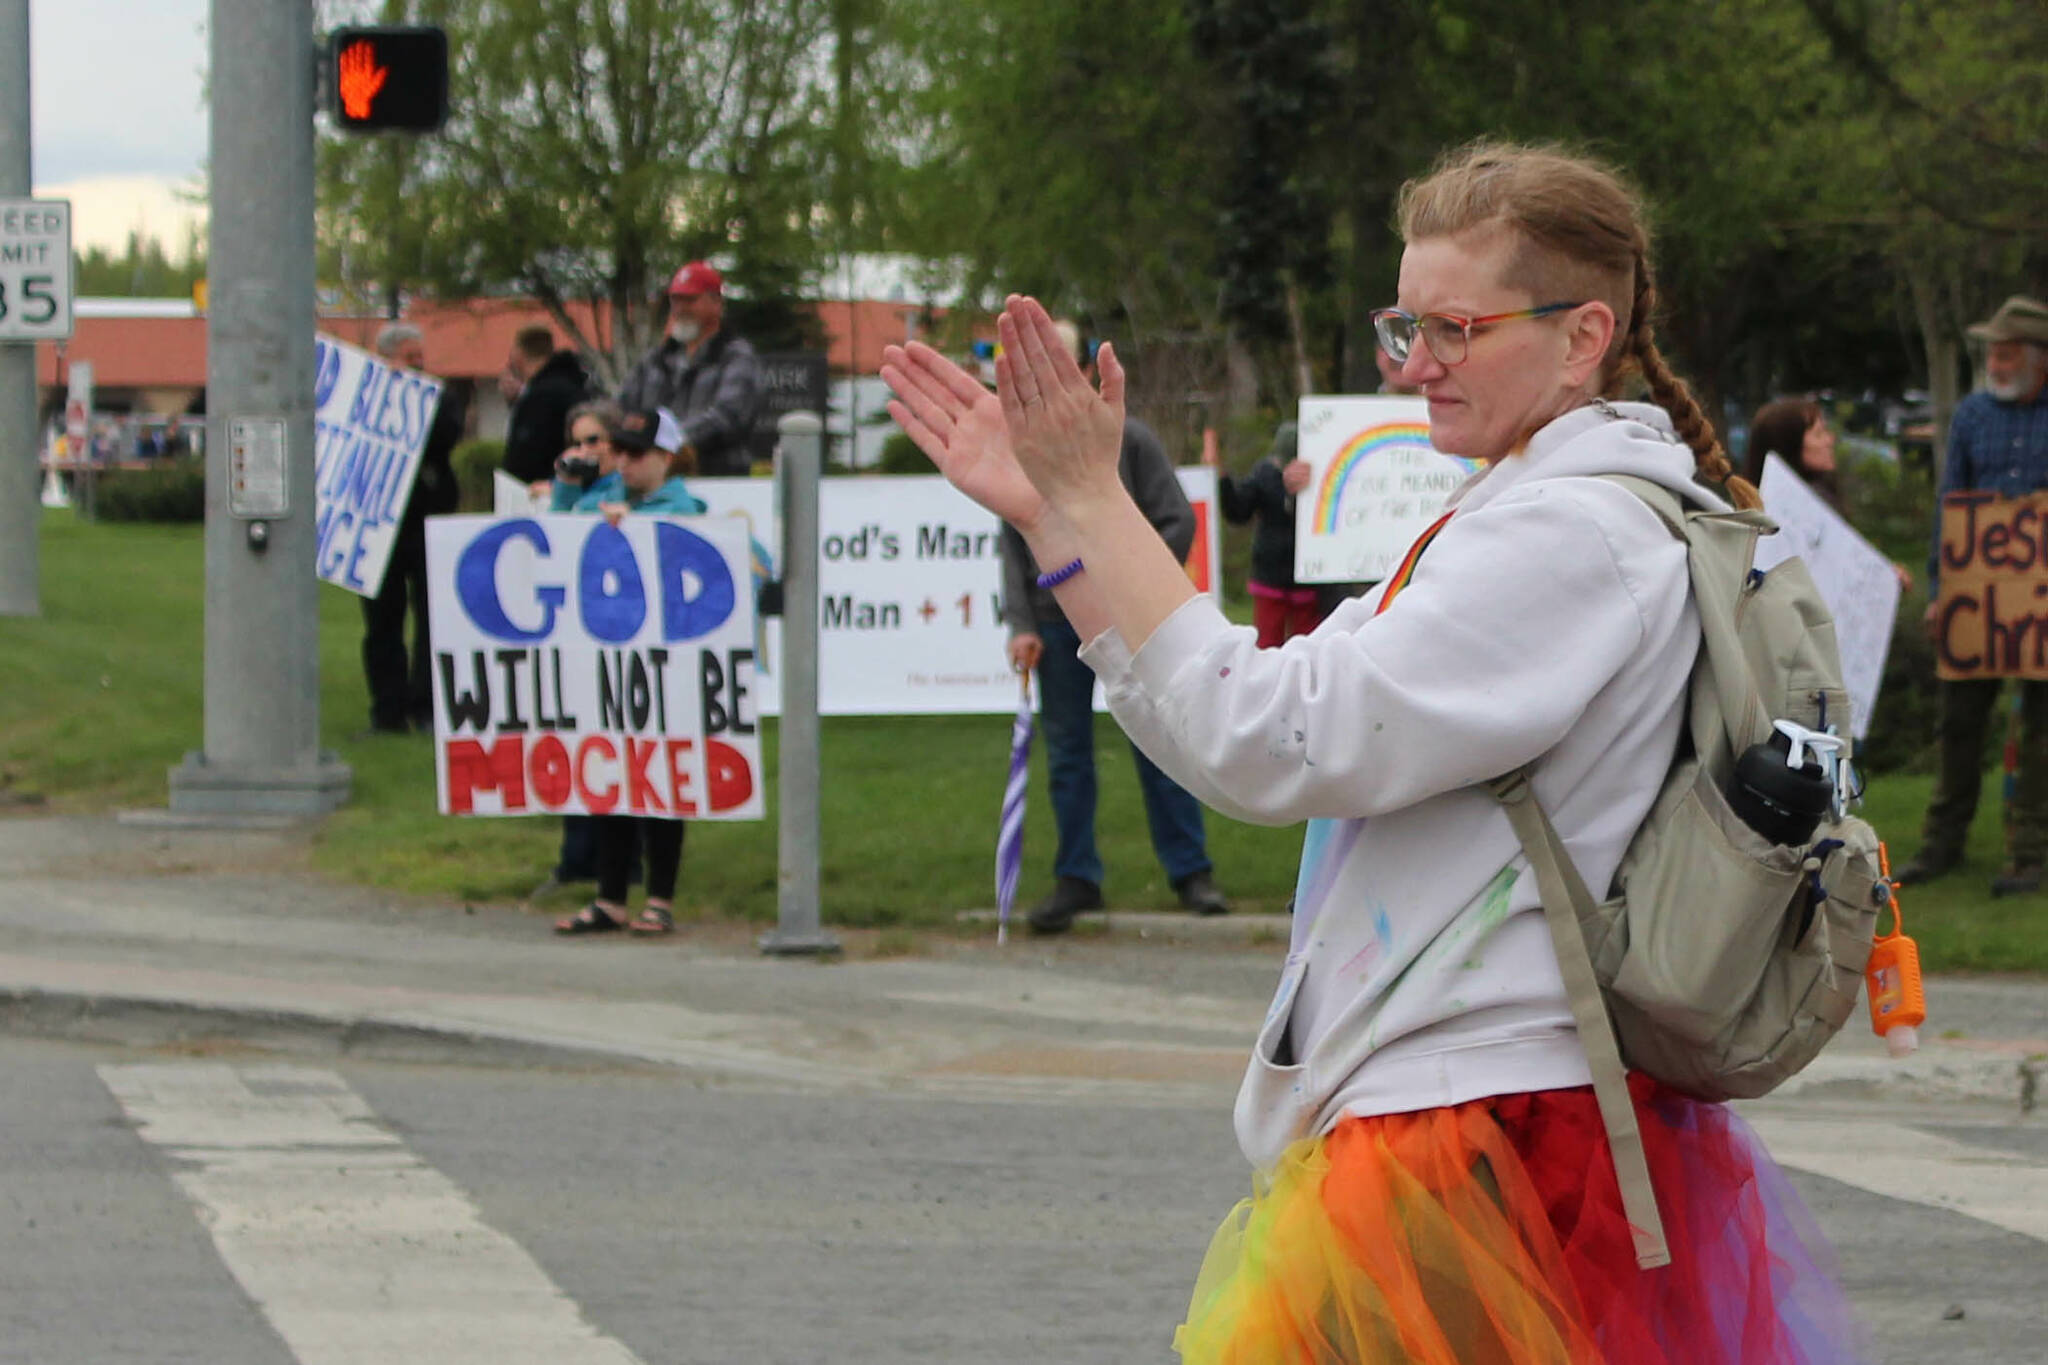 Leslie Byrd welcomes marchers to Soldotna Creek Park as part of Soldotna Pride in the Park while protesters stand in the background on Saturday, June 3, 2023 in Soldotna, Alaska. (Ashlyn O’Hara/Peninsula Clarion)